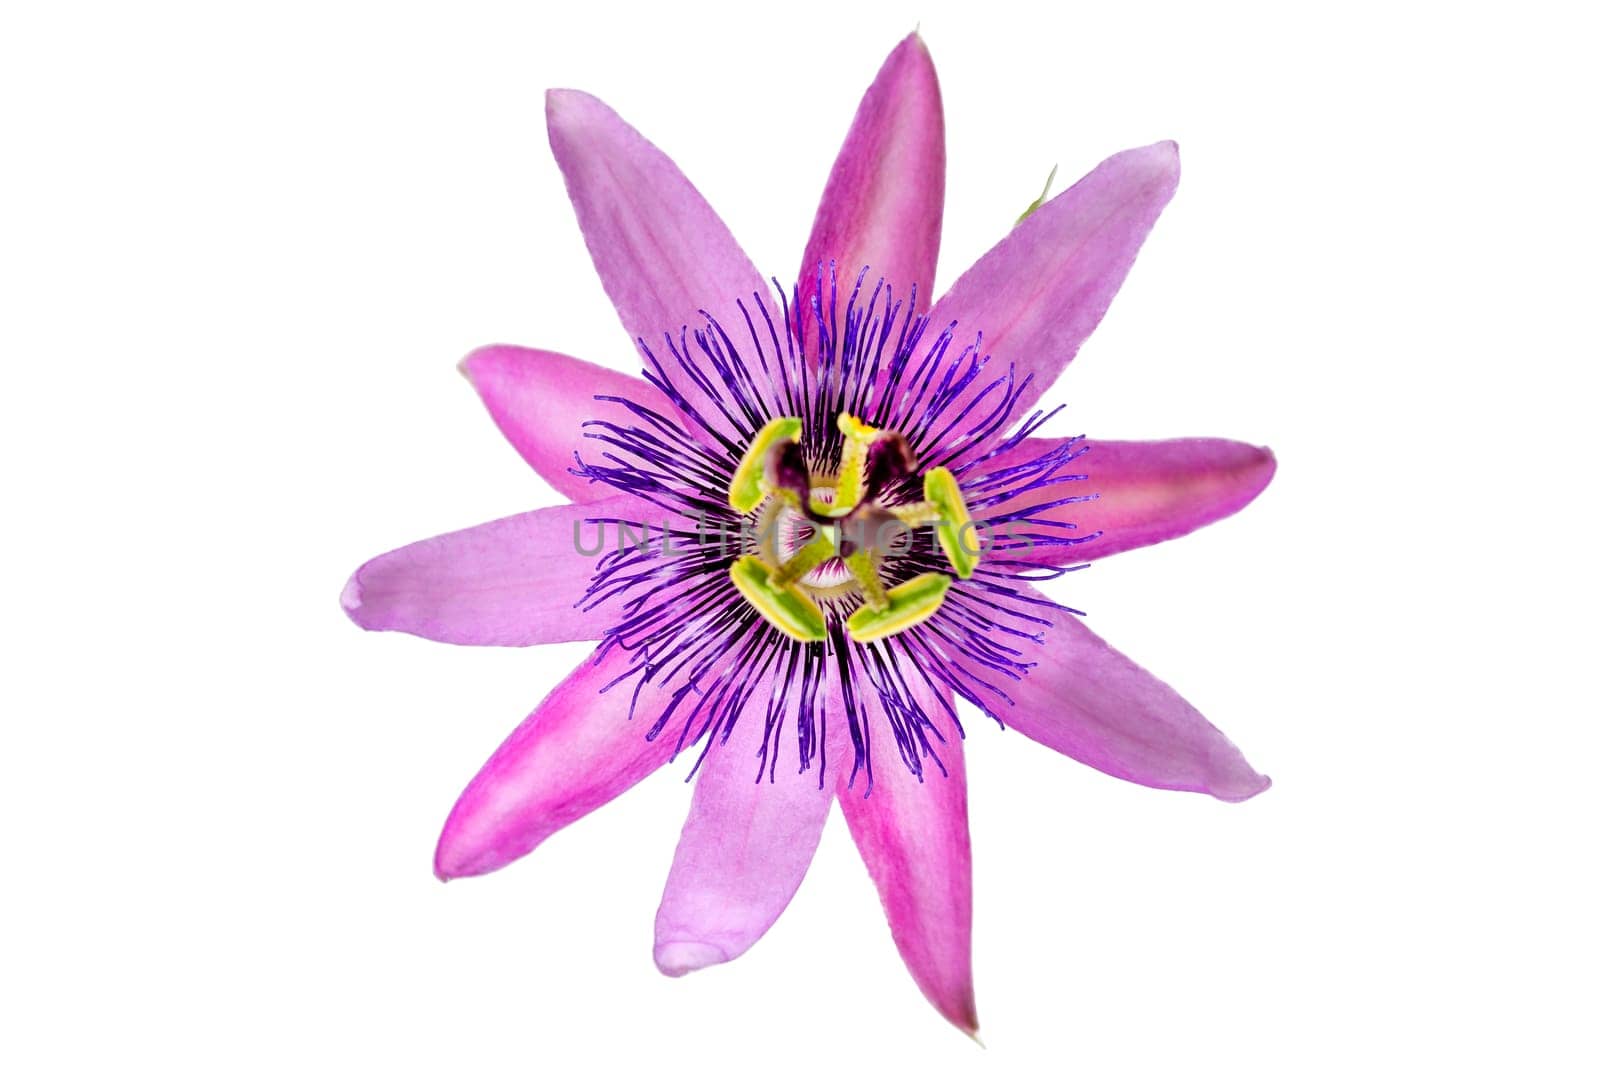 close-up of a passion flower with the botanical name passiflora violacea taken in a studio against white background